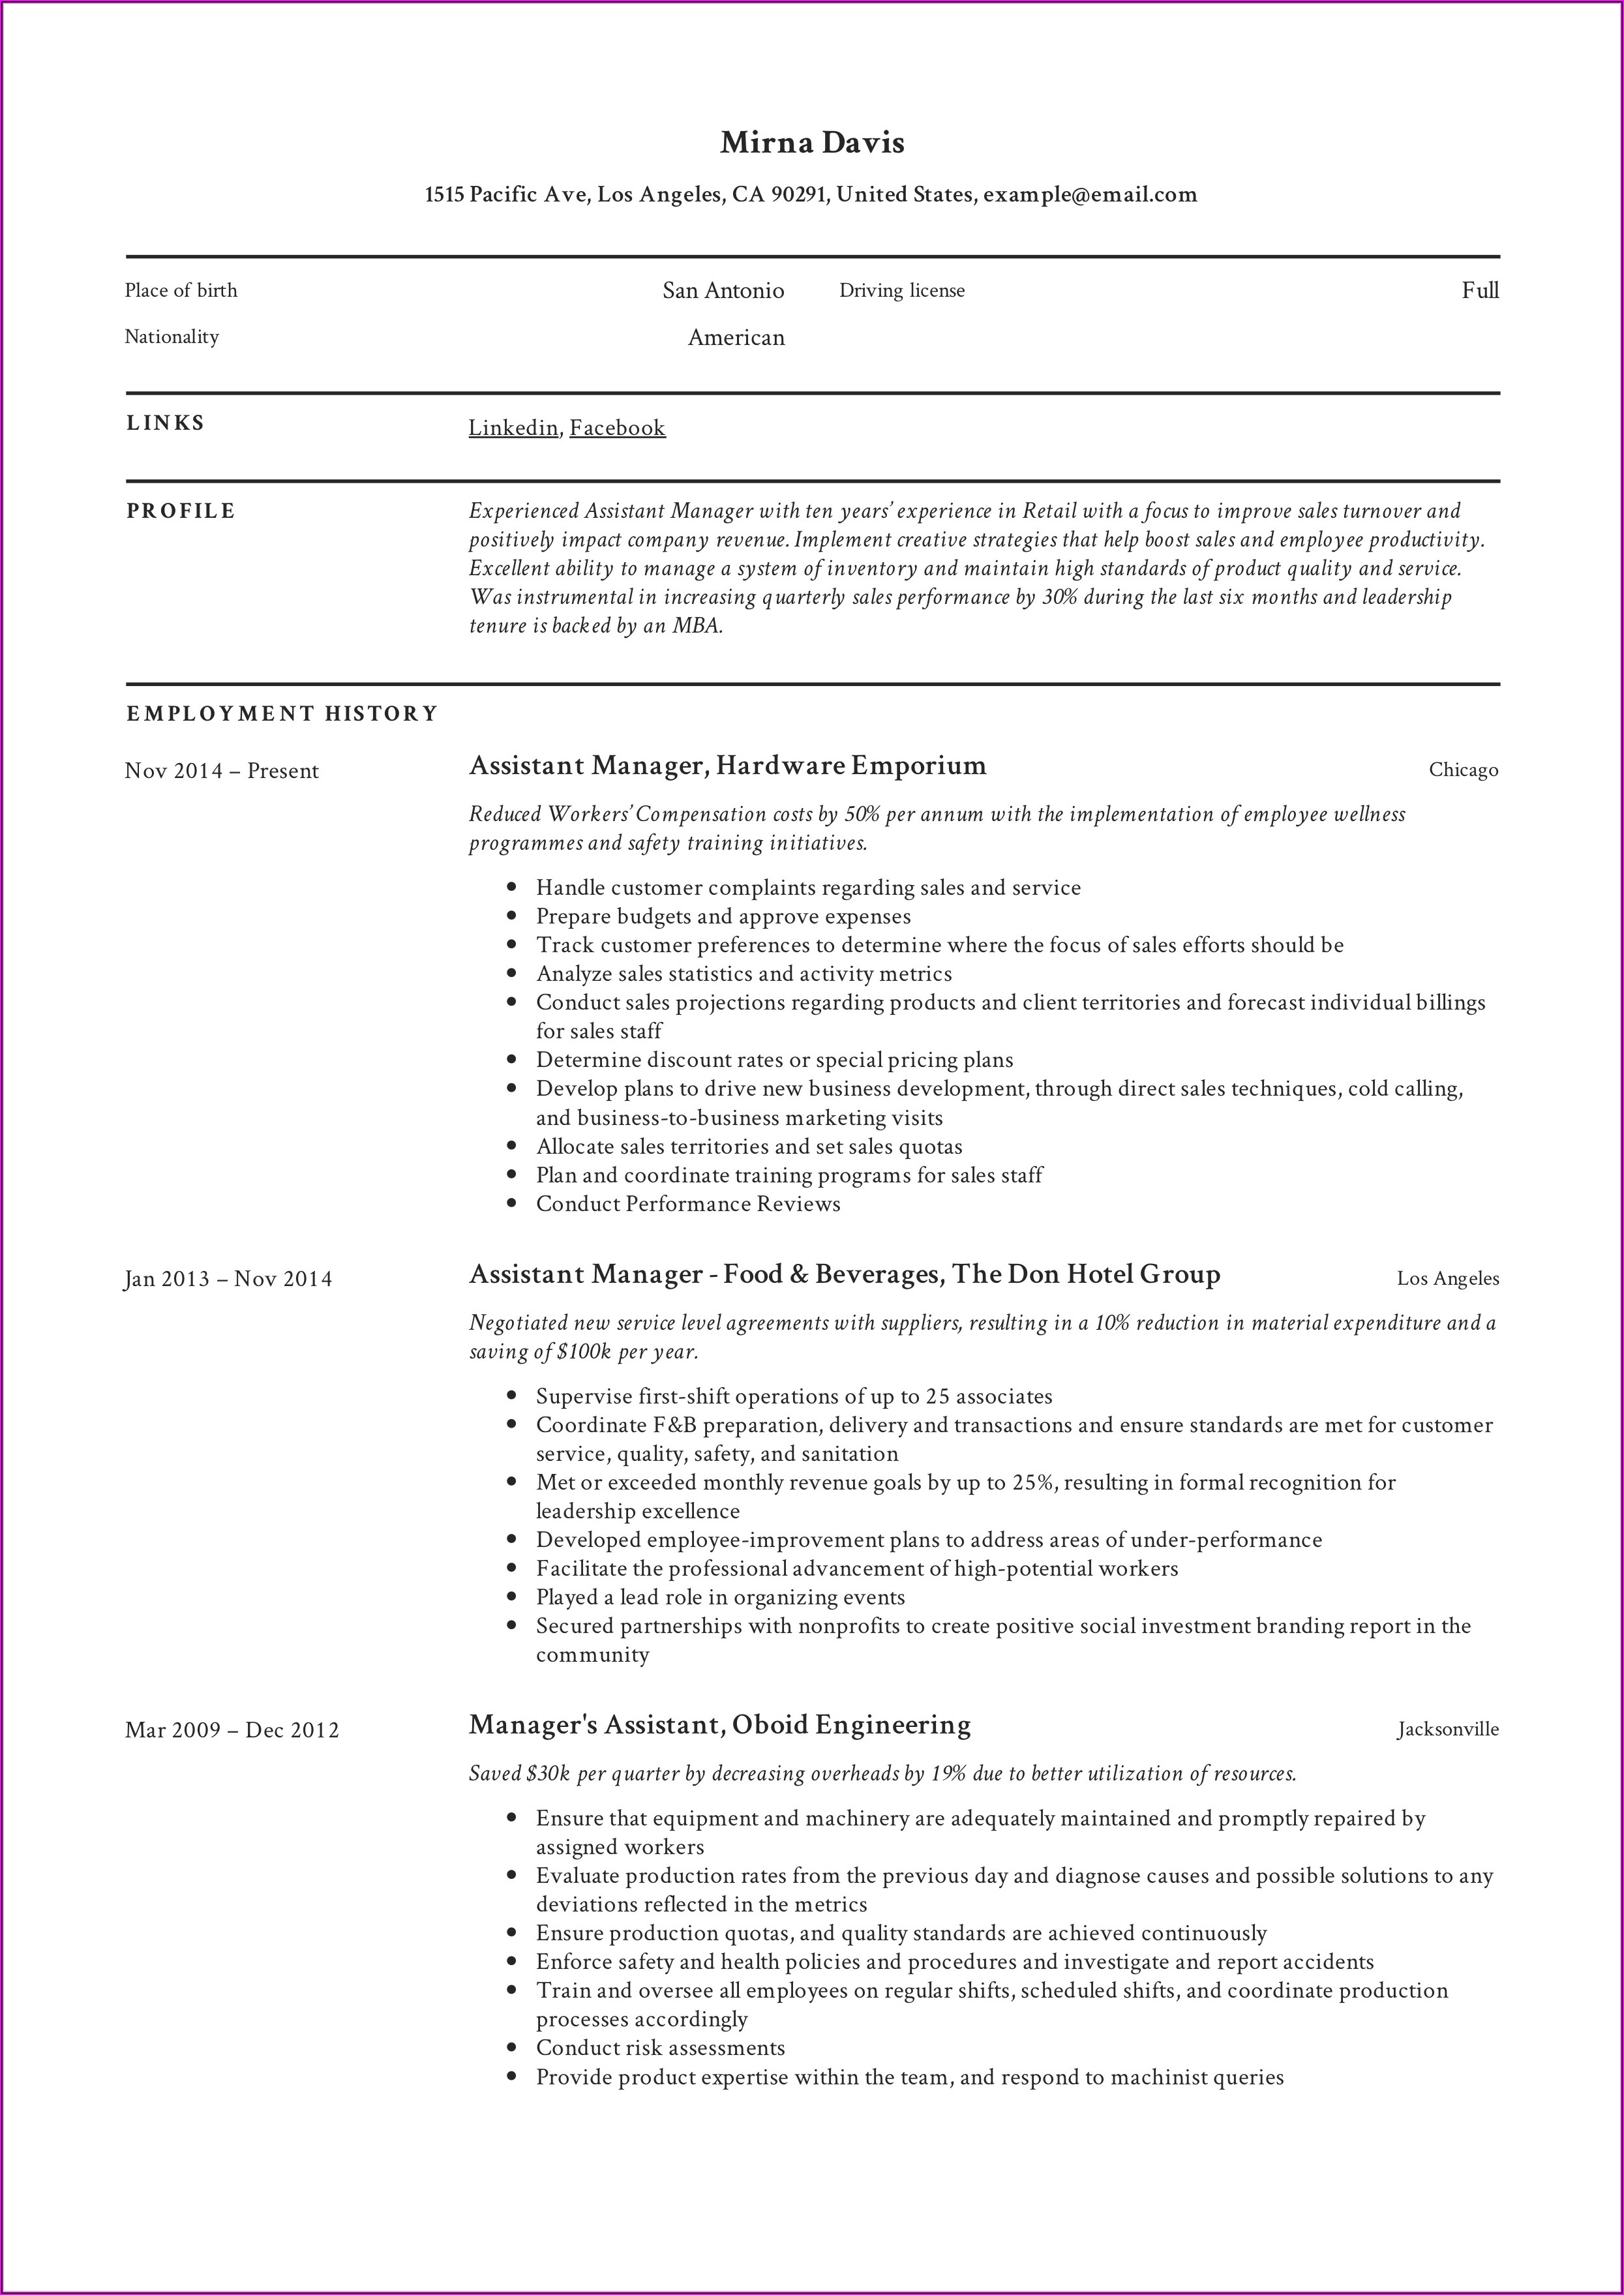 Resume Format For Assistant Manager